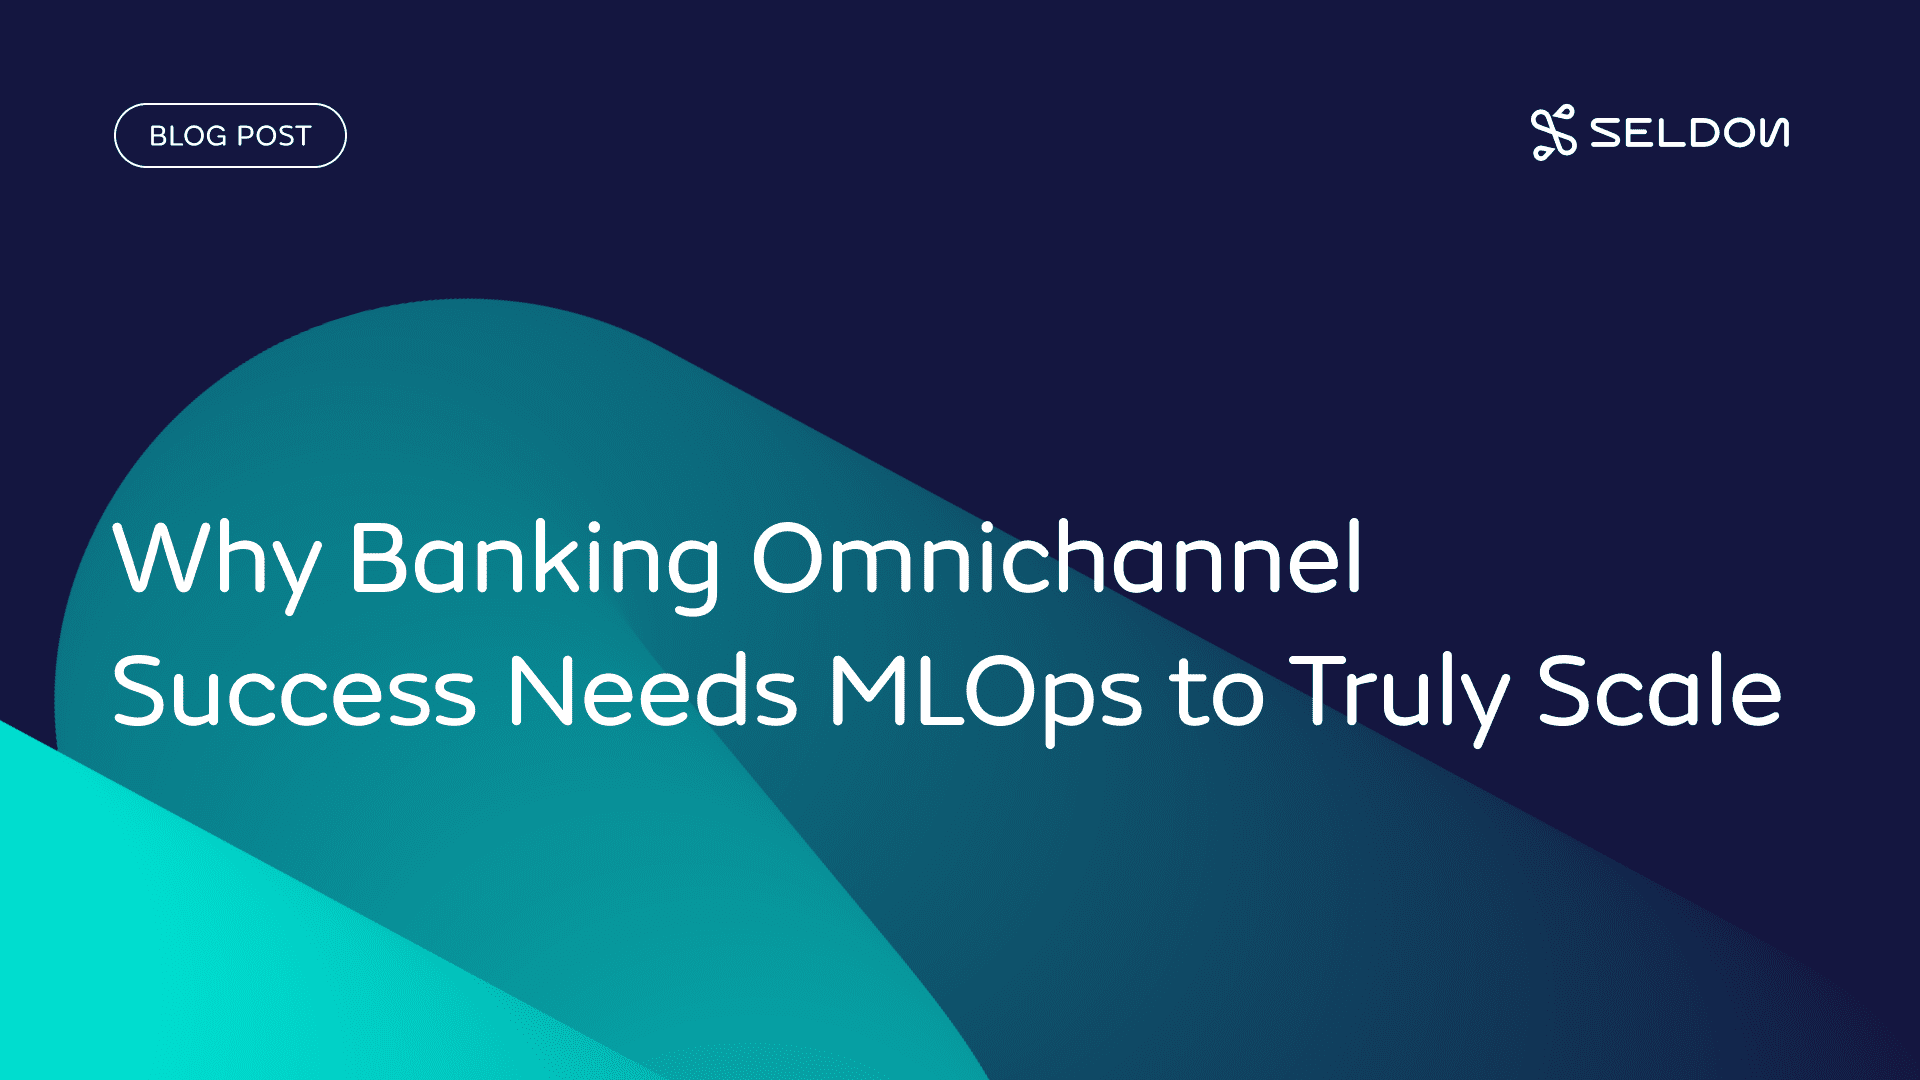 Why Banking Omnichannel Success Needs MLOps to Truly Scale